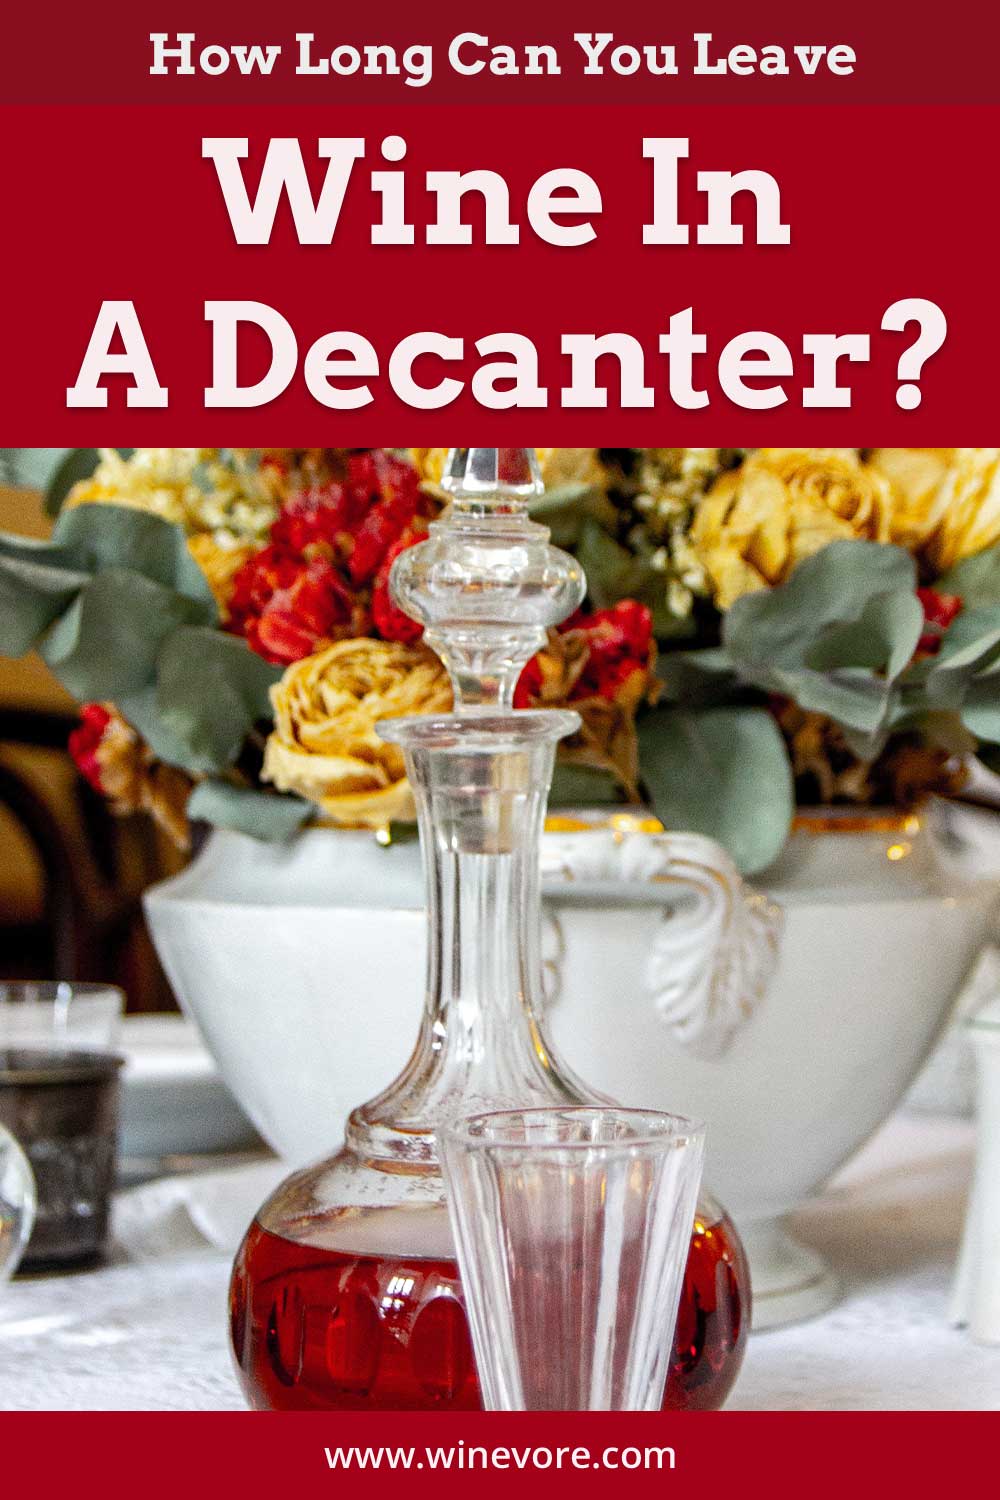 Wine in a decanter in front of flowers - How Long Can You Leave Wine In A Decanter?